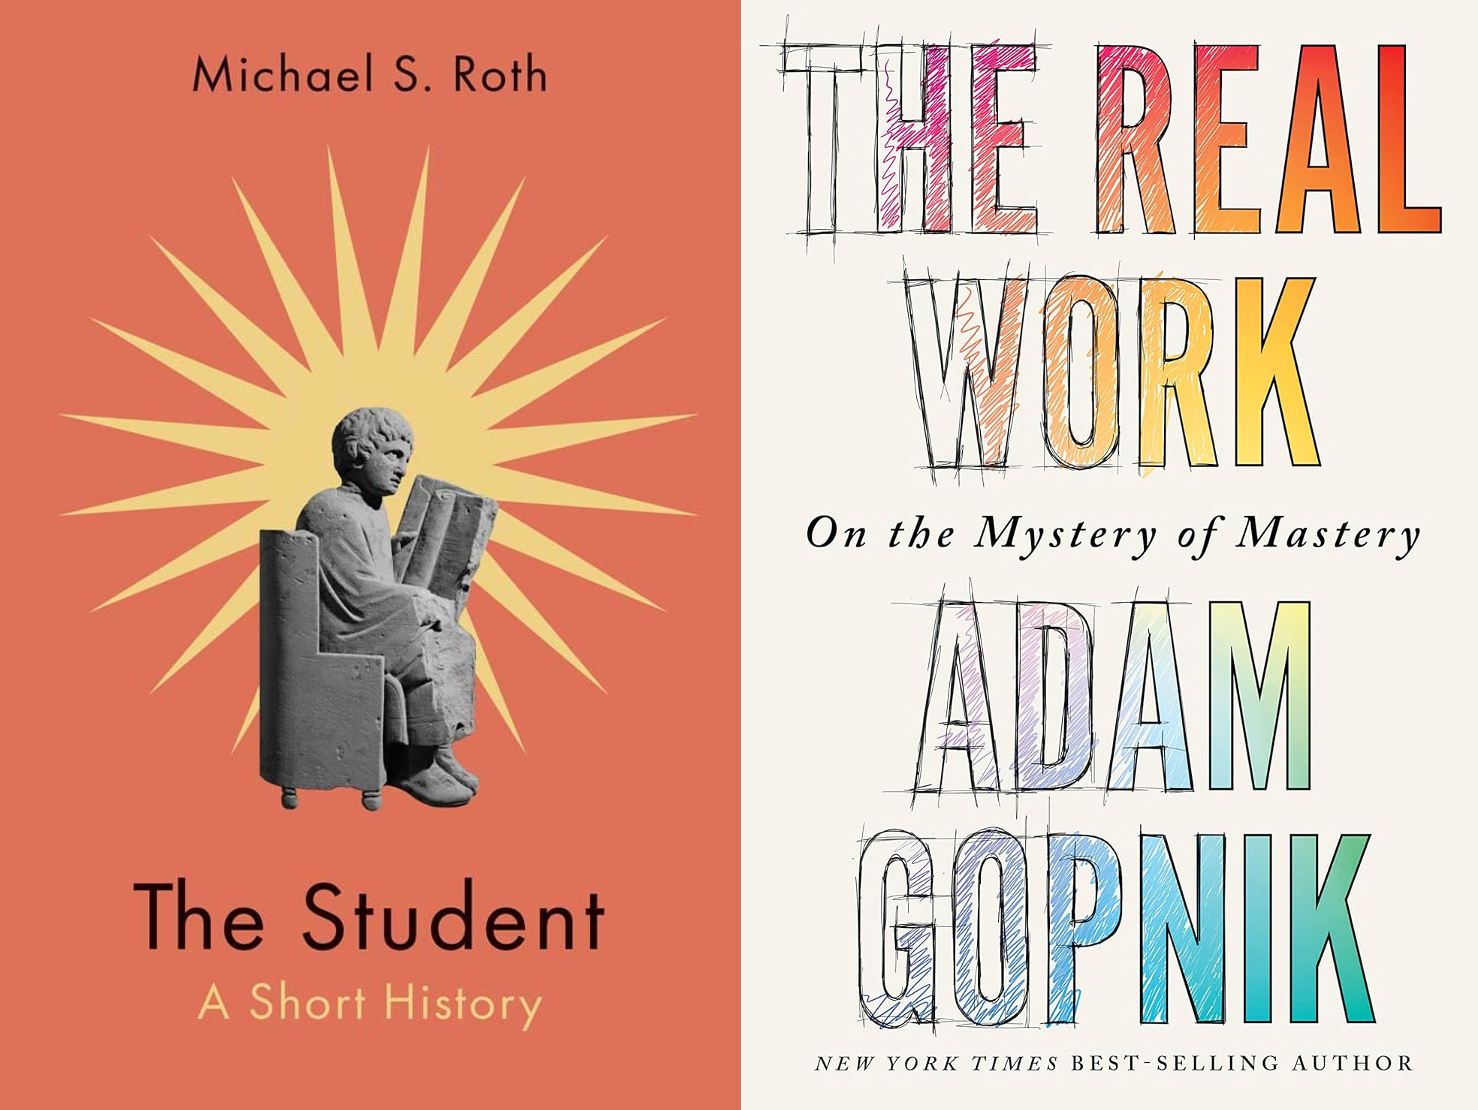 Against Coolness: On Two New Books About Being a Student